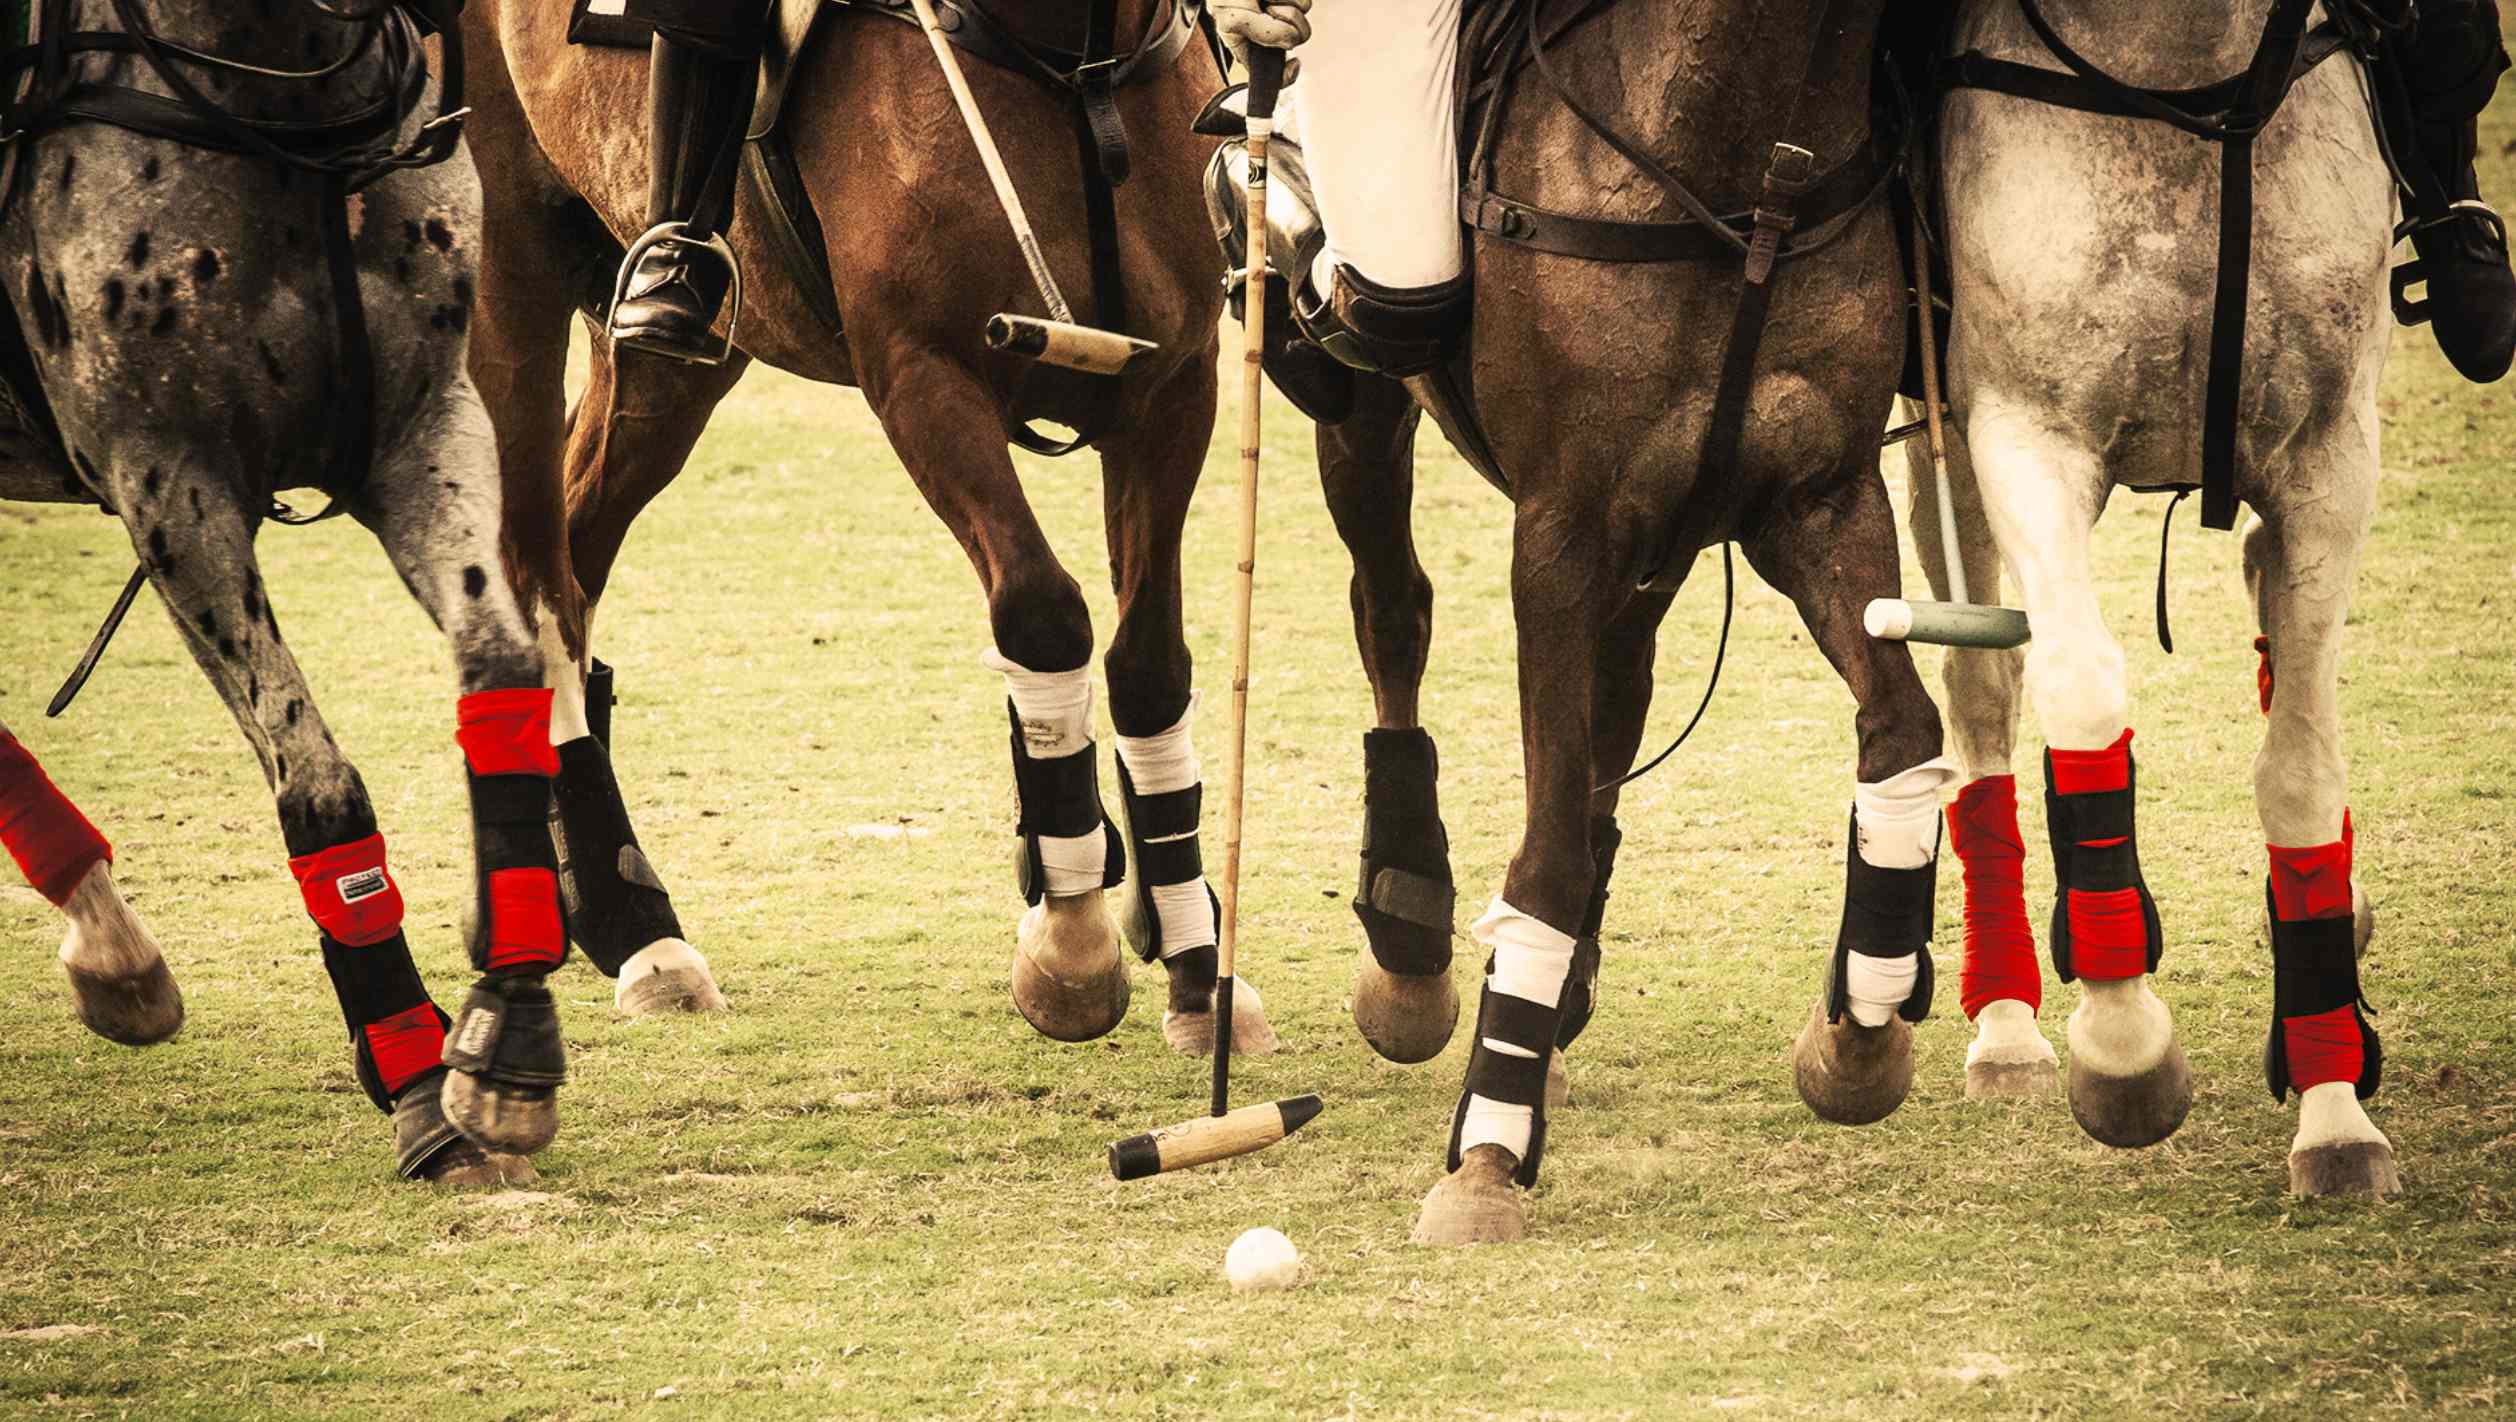 You are currently viewing Engel & Völkers + Land Rover Polo School